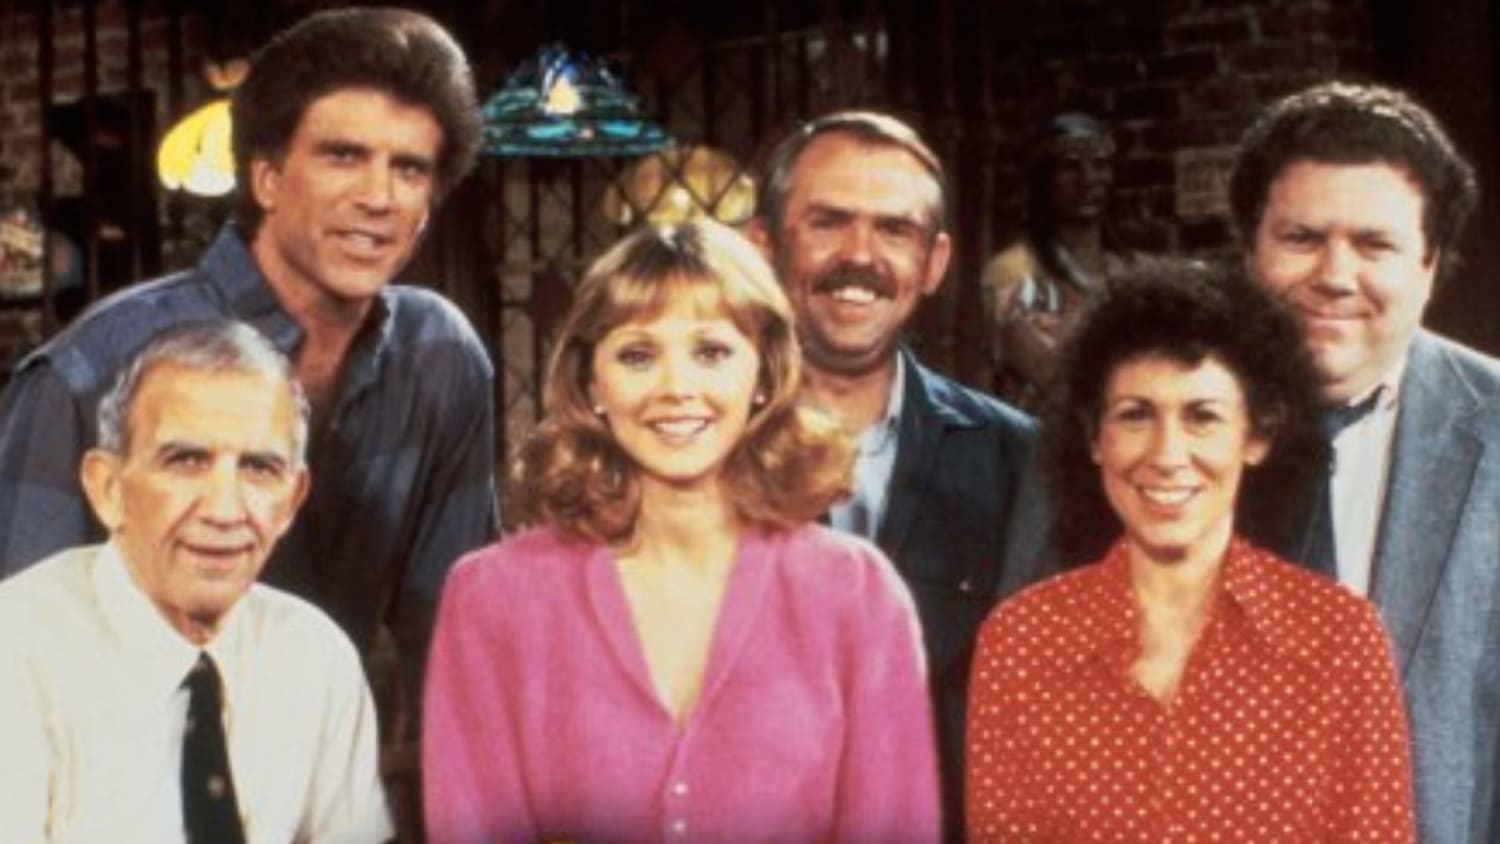 25 Classic TV Series Audiences Most Want to See Make a Comeback